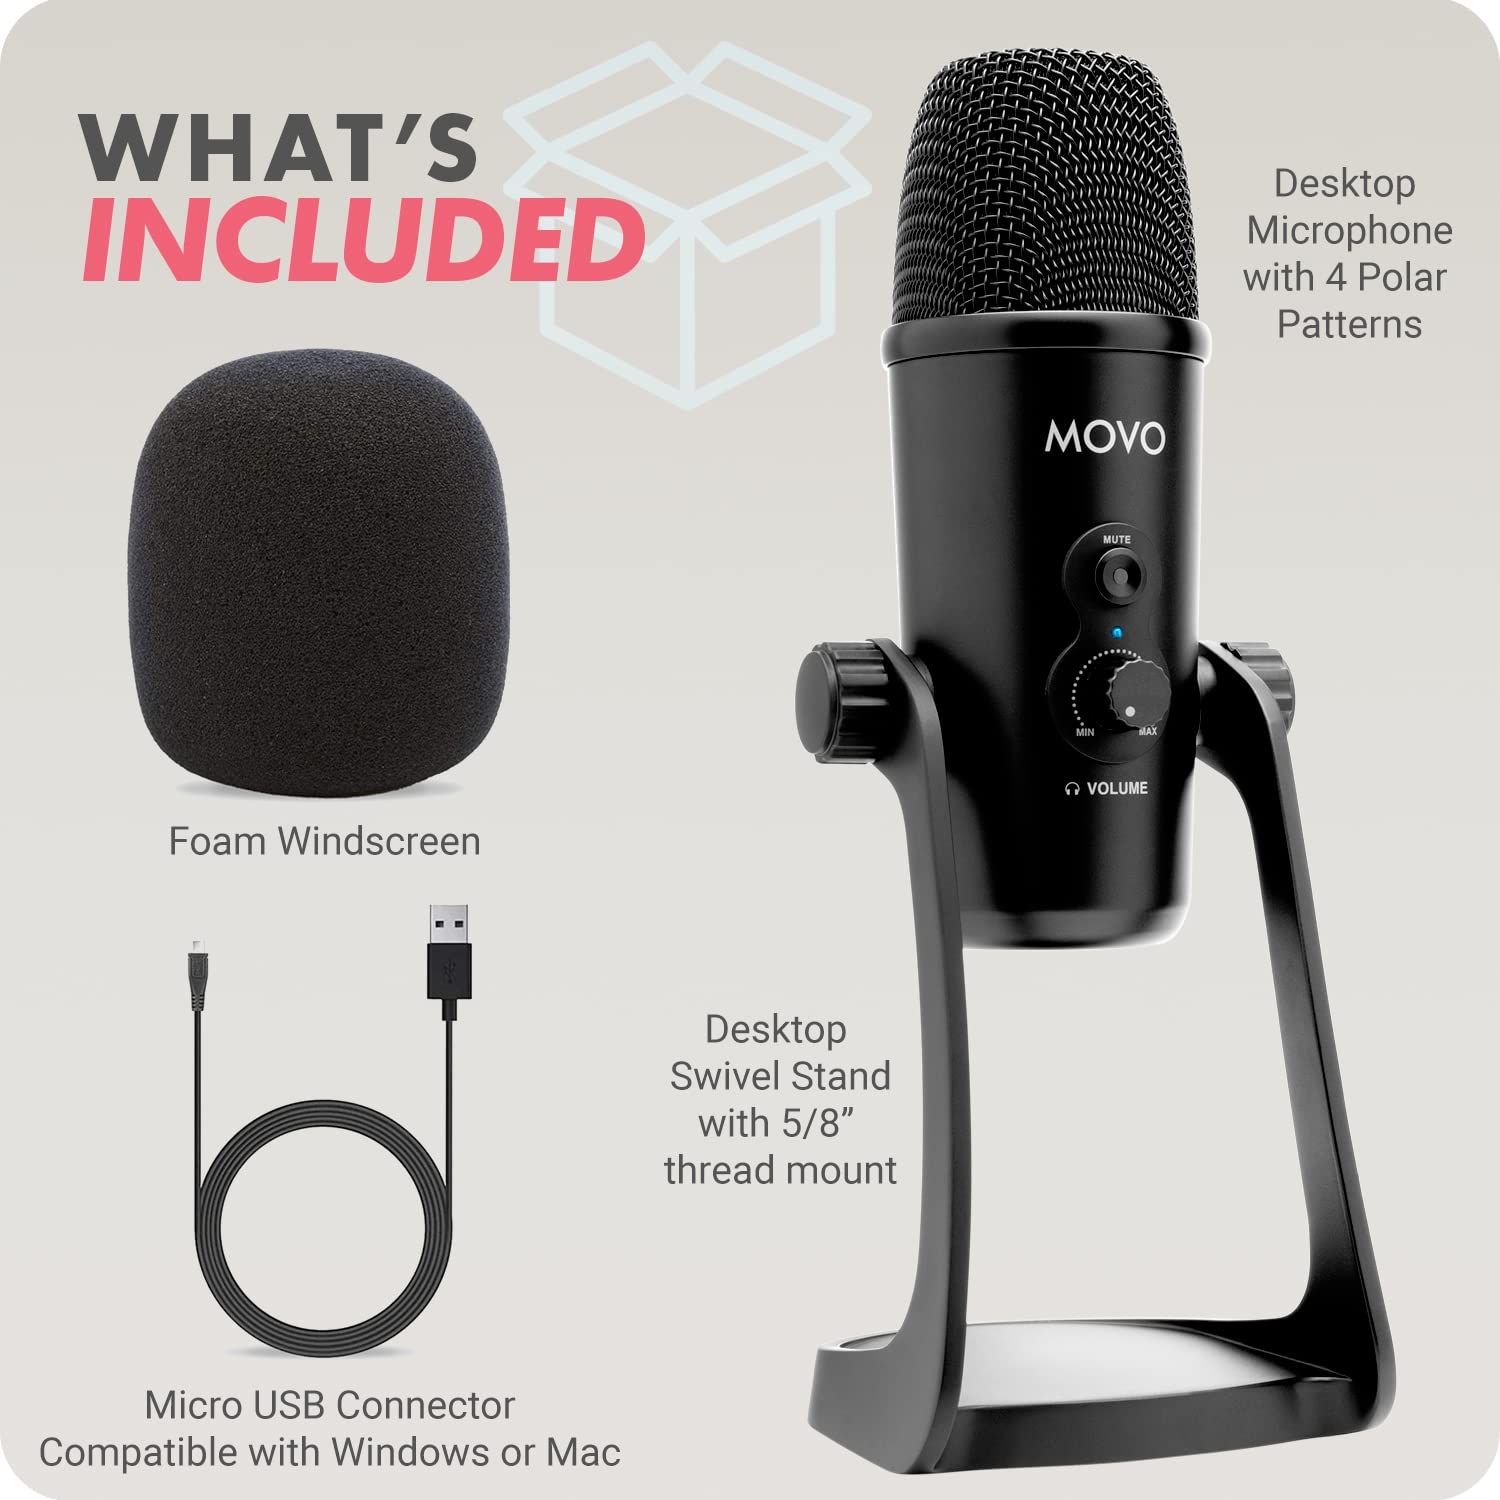 Movo UM700 Desktop USB Microphone for Computer with Adjustable Pickup Patterns  - Like New